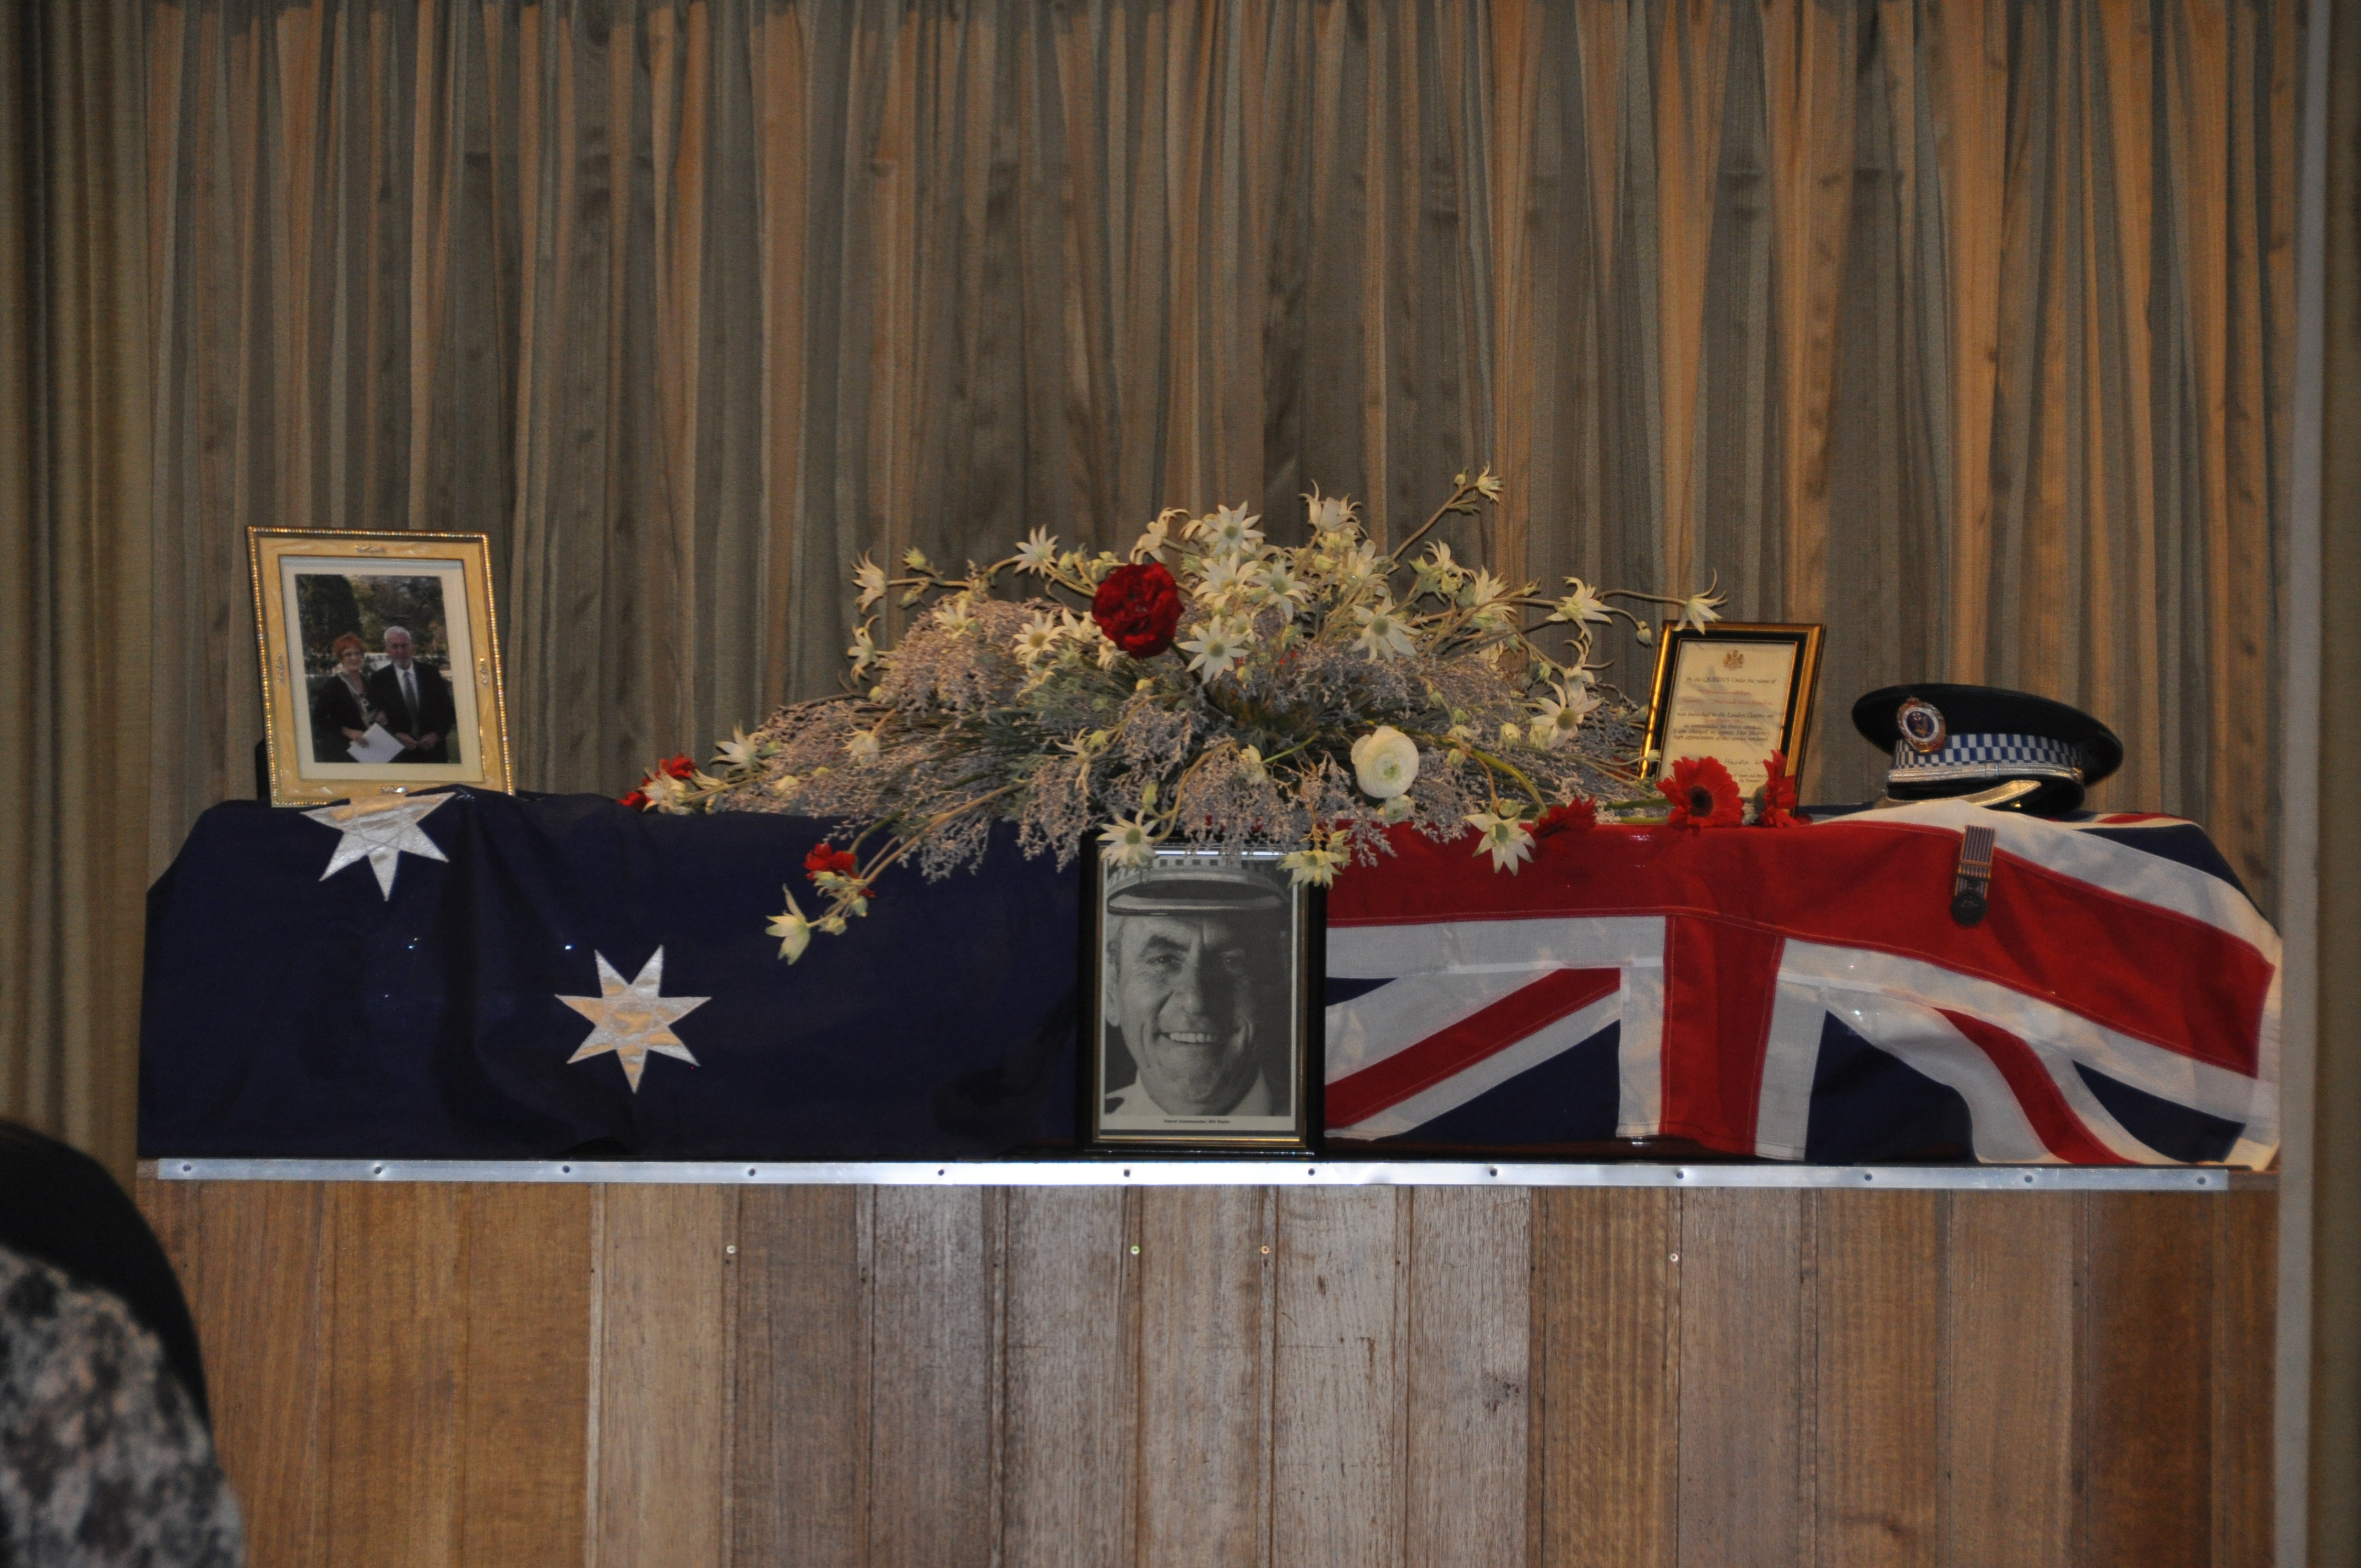 WEDNESDAY 28 SEPTEMBER 2011 CREMATION CEREMONY FOR RETIRED CHIEF INSPECTOR WILLIAM 'BILL' LEONARD ESPIE. Born 250635 - 220911 SERVICE AT THE SOUTH CHAPEL, ROOKWOOD CREMATORIUM, ROOKWOOD, 10.30AM. POLICE FUNERAL. I WORKED WITH BILL AT CABRAMATTA / FAIRFIELD / 34 DIVISION POLICE AROUND THE 1977 ERA.